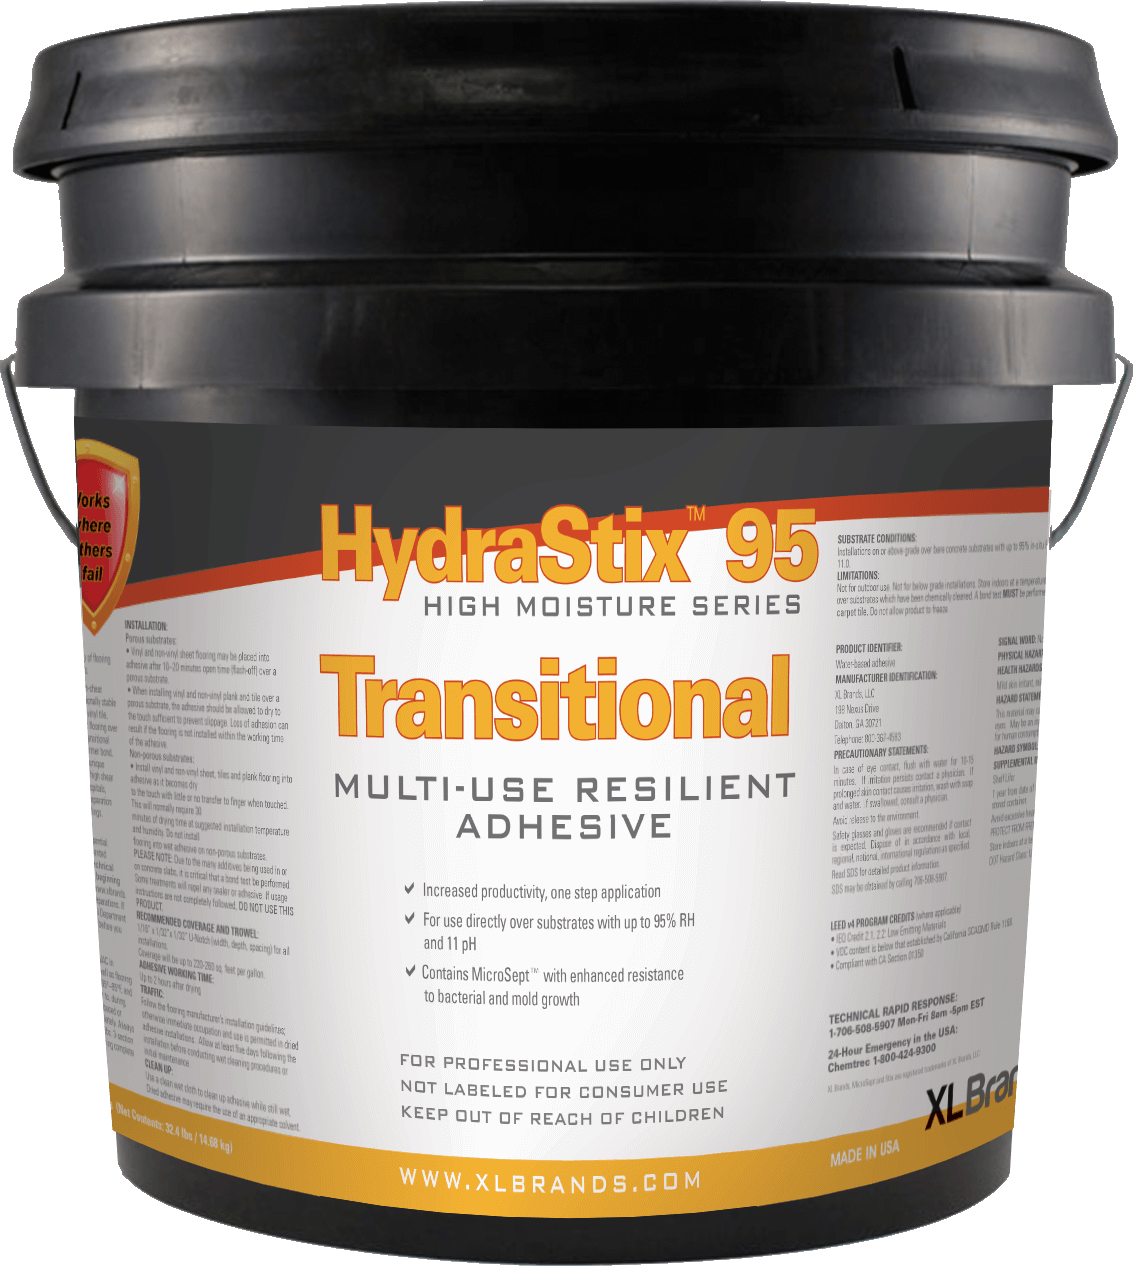 XL Brands HydraStix 95 Transitional Multi-use Resilient Adhesive - 4 Gal. Pail